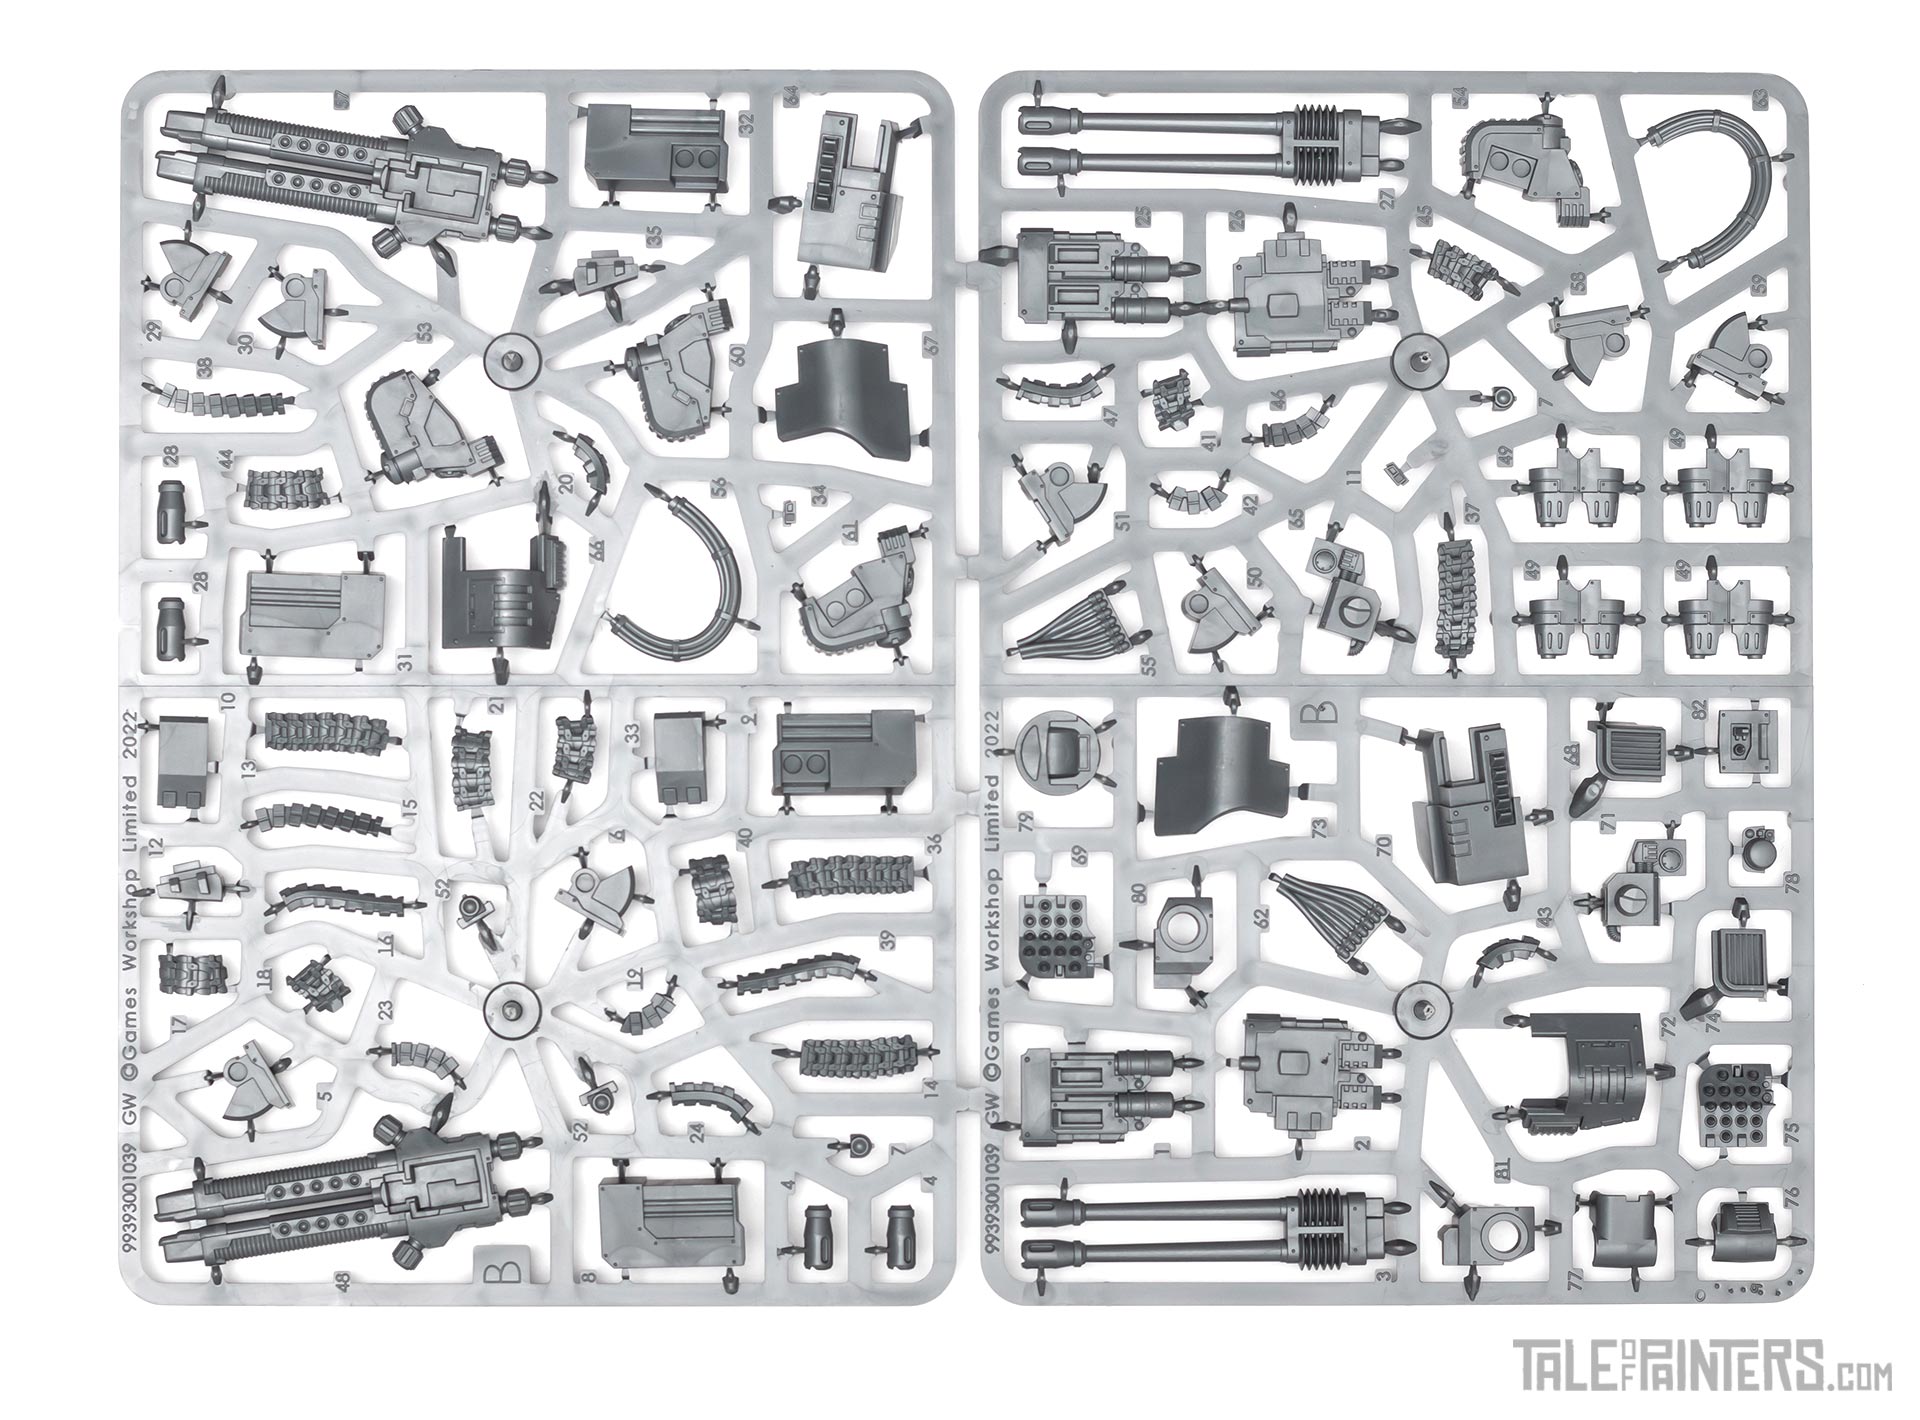 Horus Heresy Deredeo Dreadnought in Anvilus Configuration sprues 3 and 4